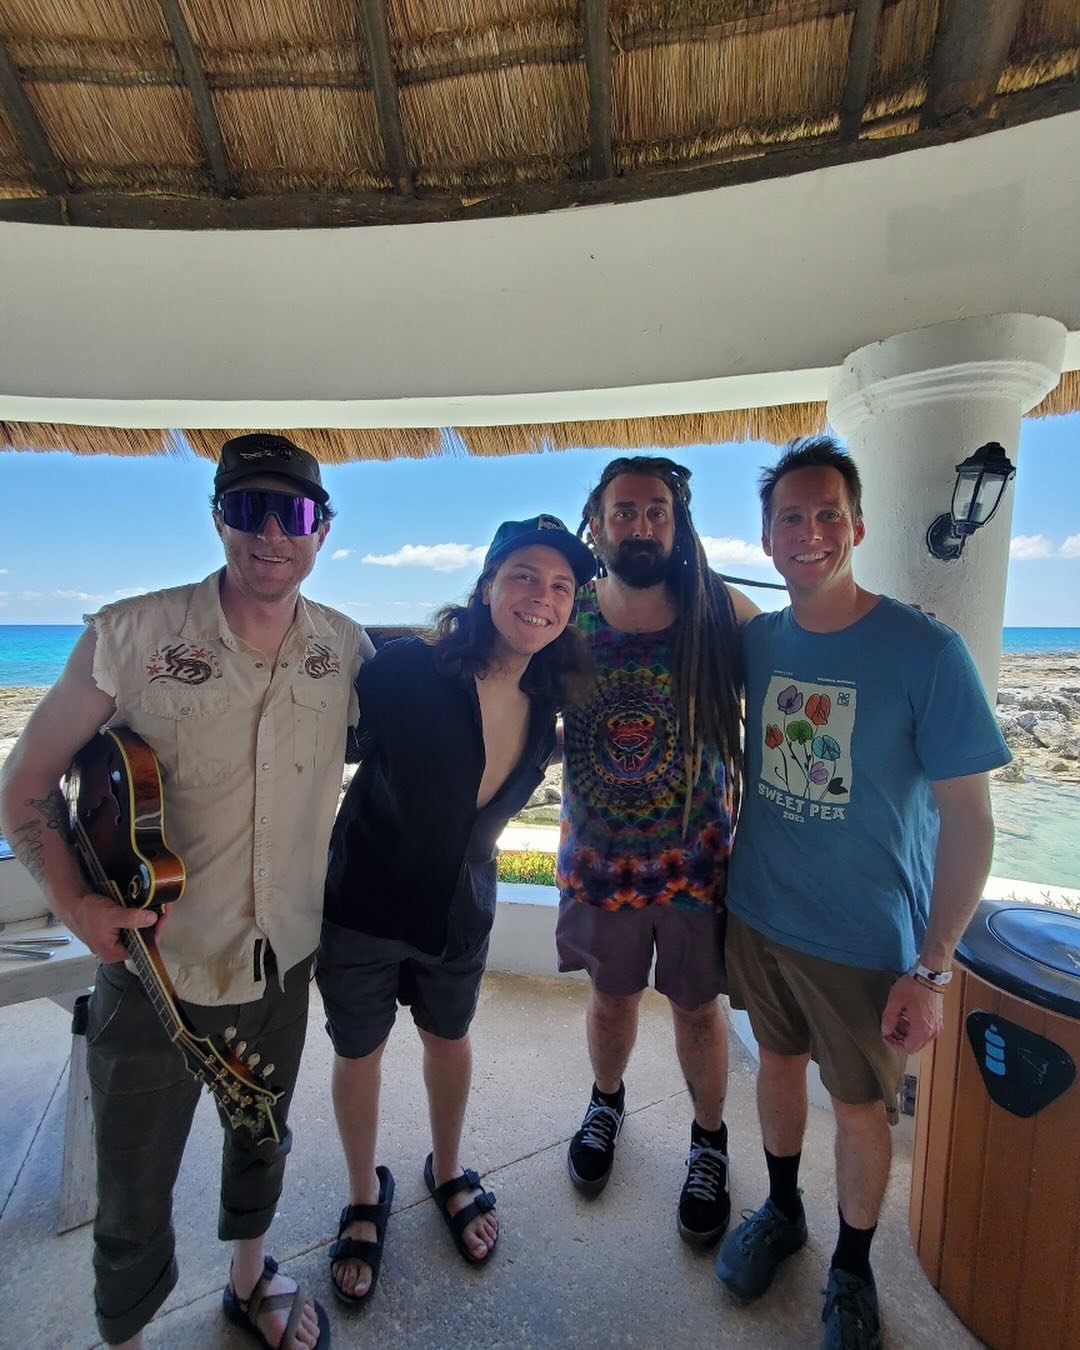 Vacation mode engaged 🏝We made it south of the border for @panicenlaplaya here in Puerto Aventuras, Mexico and are in good company with our pal @thedanieldonato 🤙 We hit at 4:00pm today on Heaven Beach Stage. Let&rsquo;s frickin&rsquo; ride 🔥

📸: